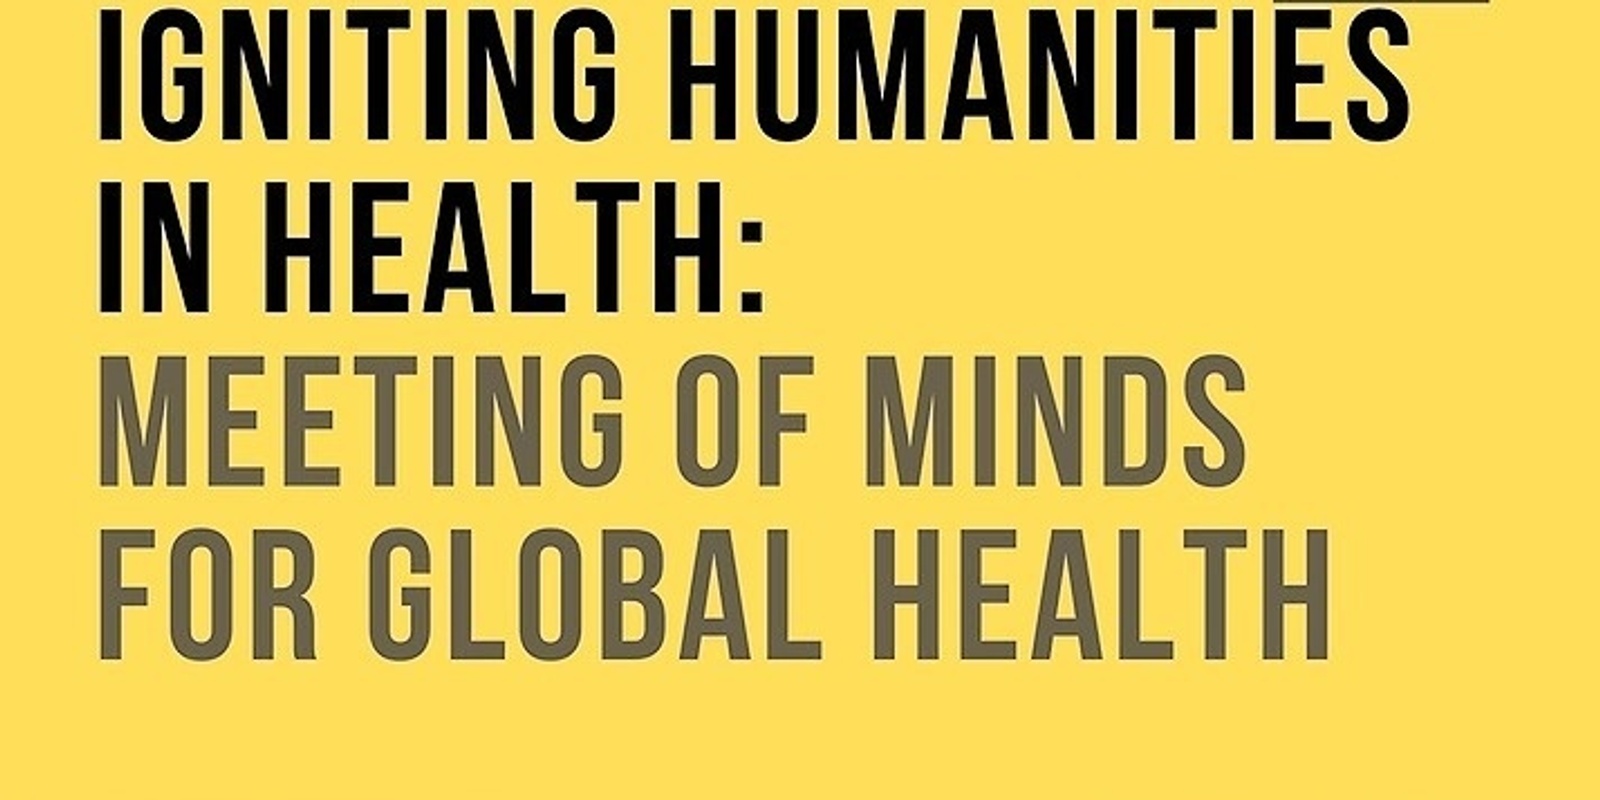 Banner image for IGNITING HUMANITIES IN HEALTH - Meeting of Minds for Global Health